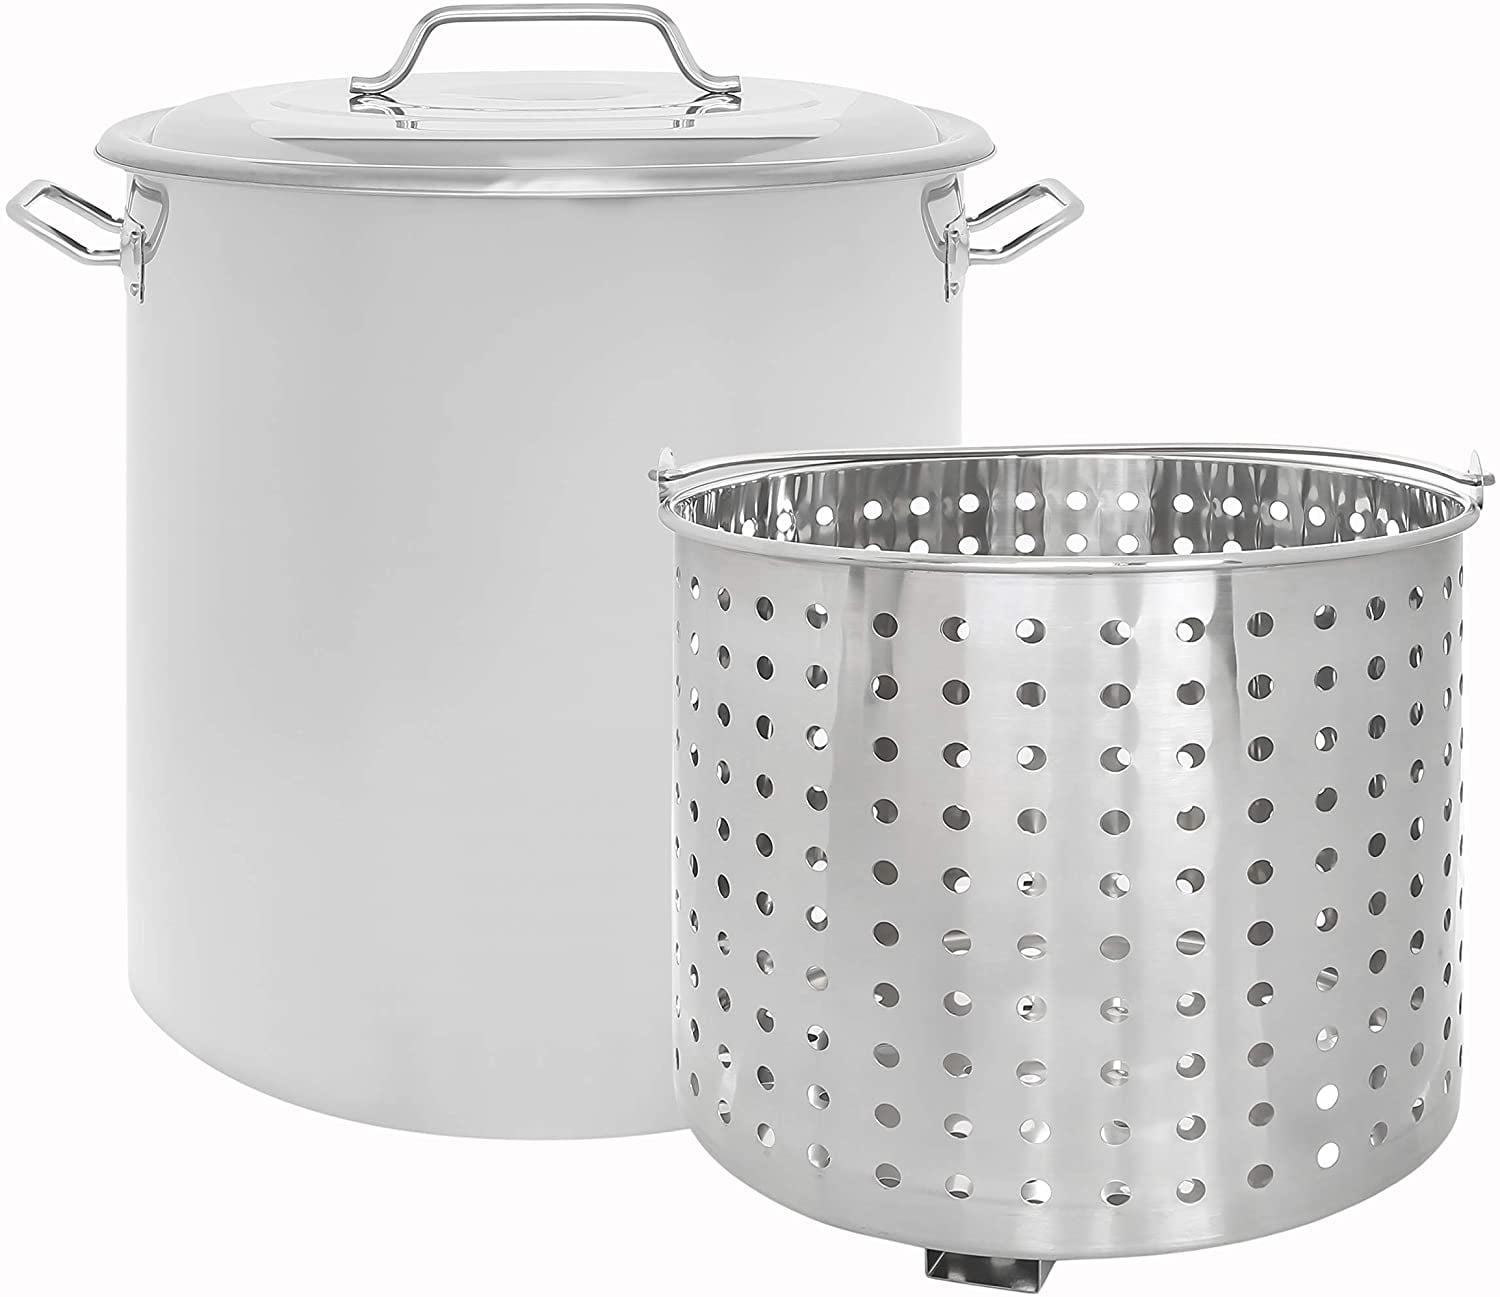 40 Quart CONCORD Stainless Steel Stock Pot w/Steamer Basket Cookware great for boiling and steaming 